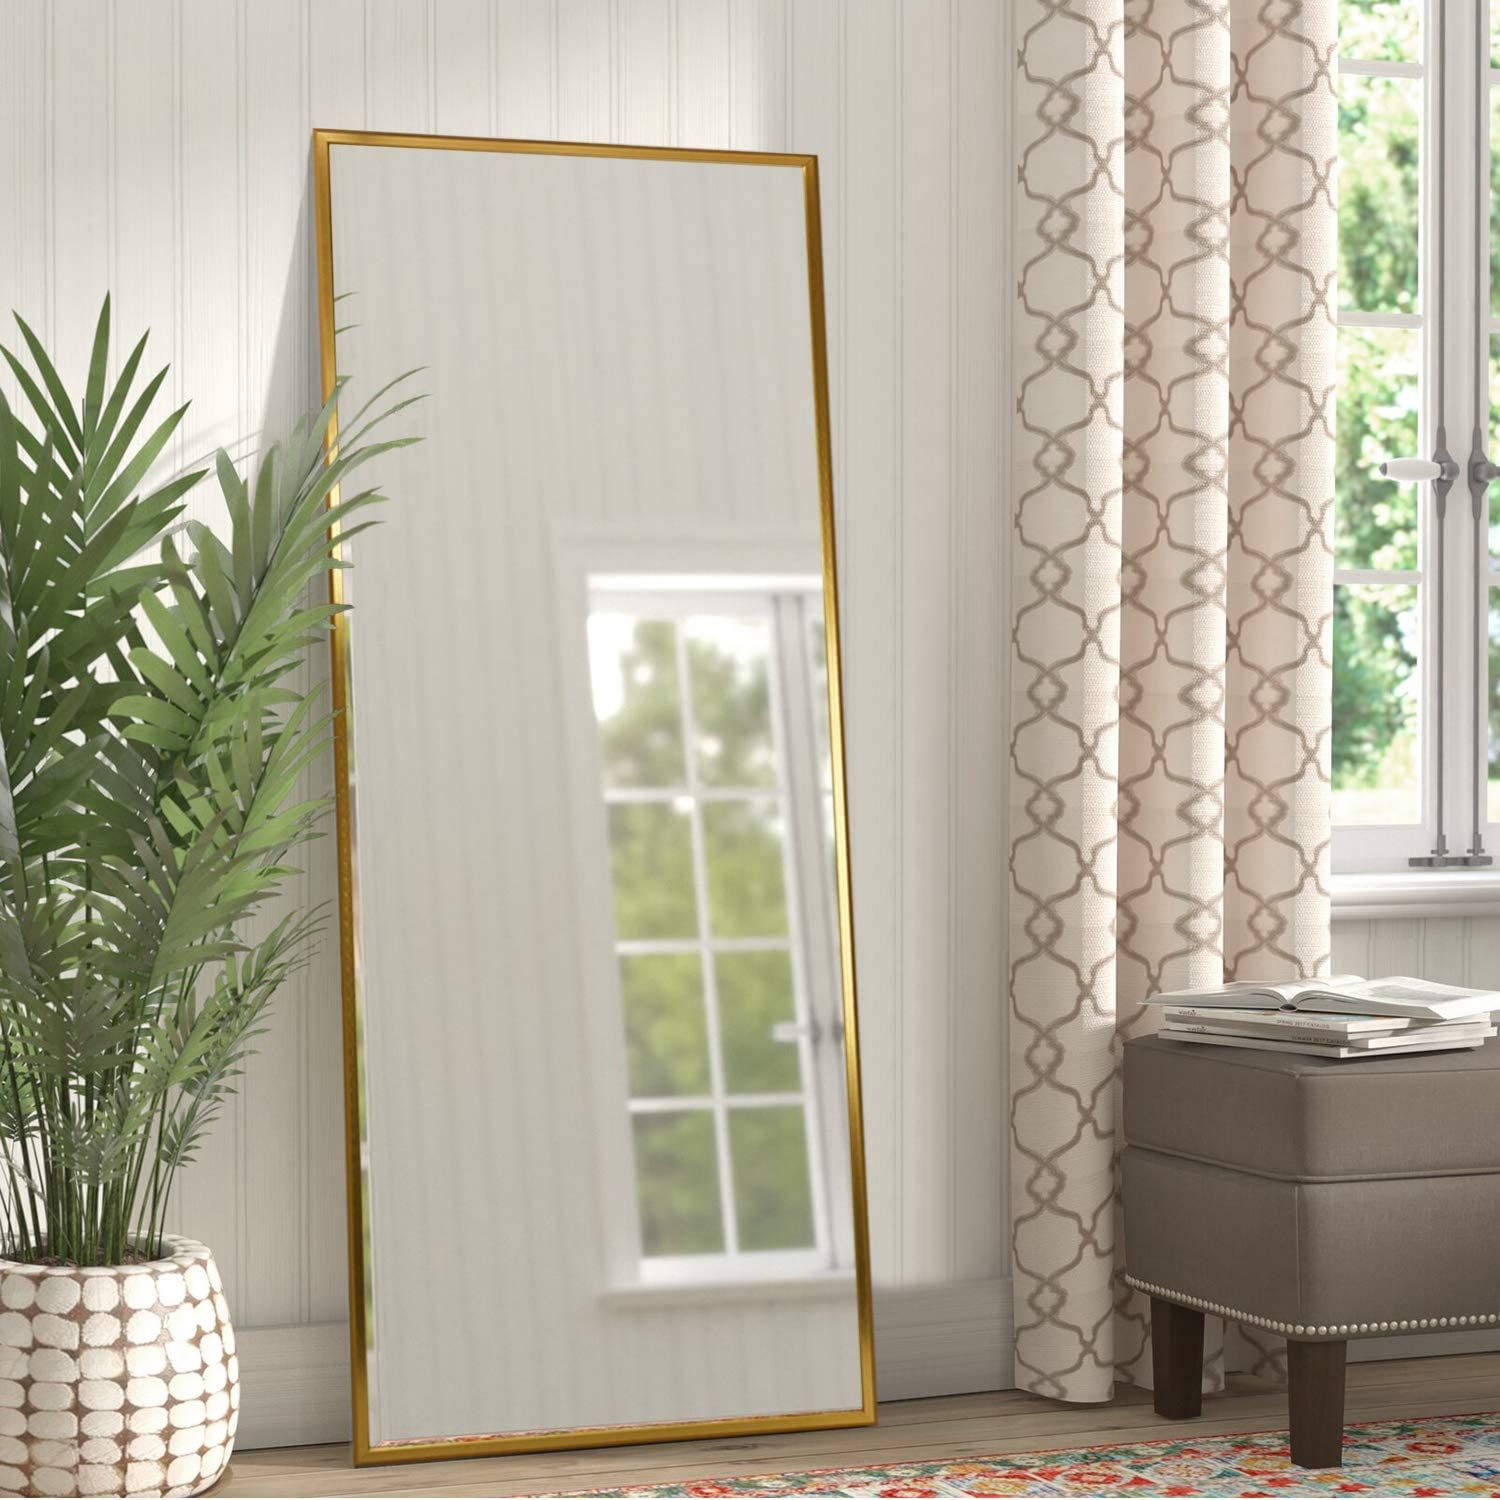 Full Length Mirror Floor Mirror Hanging/leaning Large Wall Mounted Pertaining To Clear Wall Mirrors (View 4 of 15)